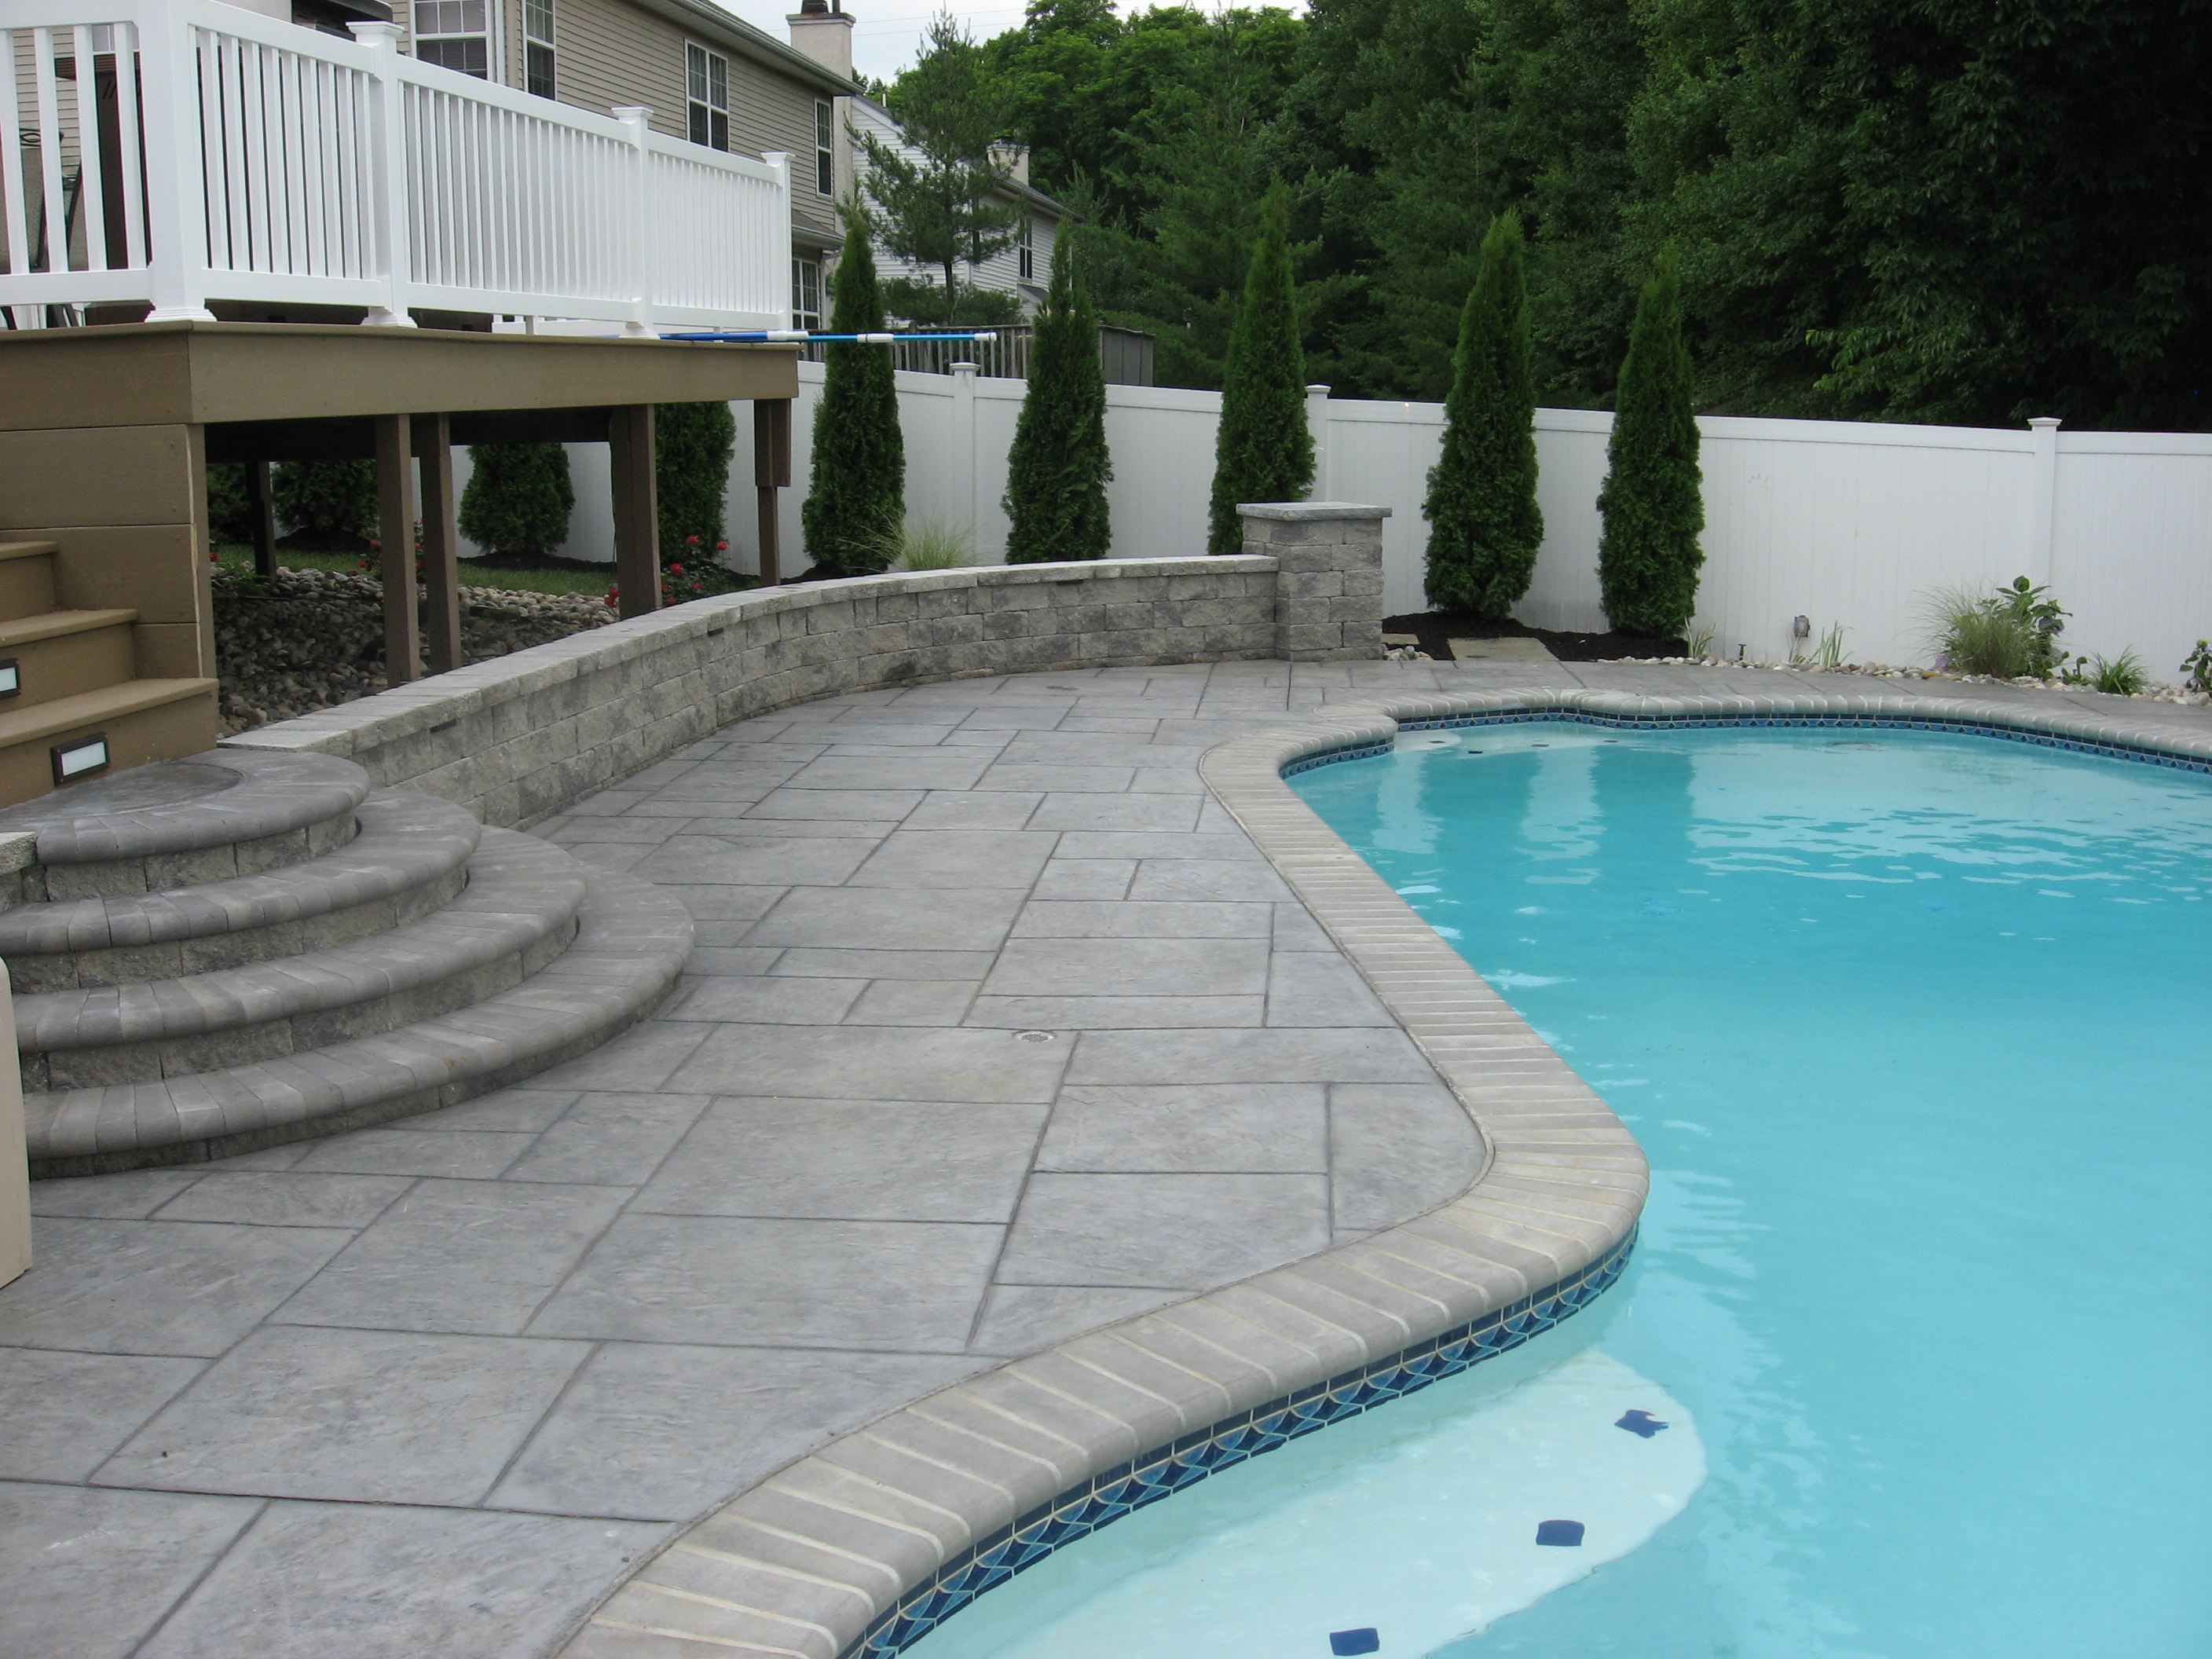 Stamped Concrete Companies in Bucks County, PA - Landscaping Company NJ